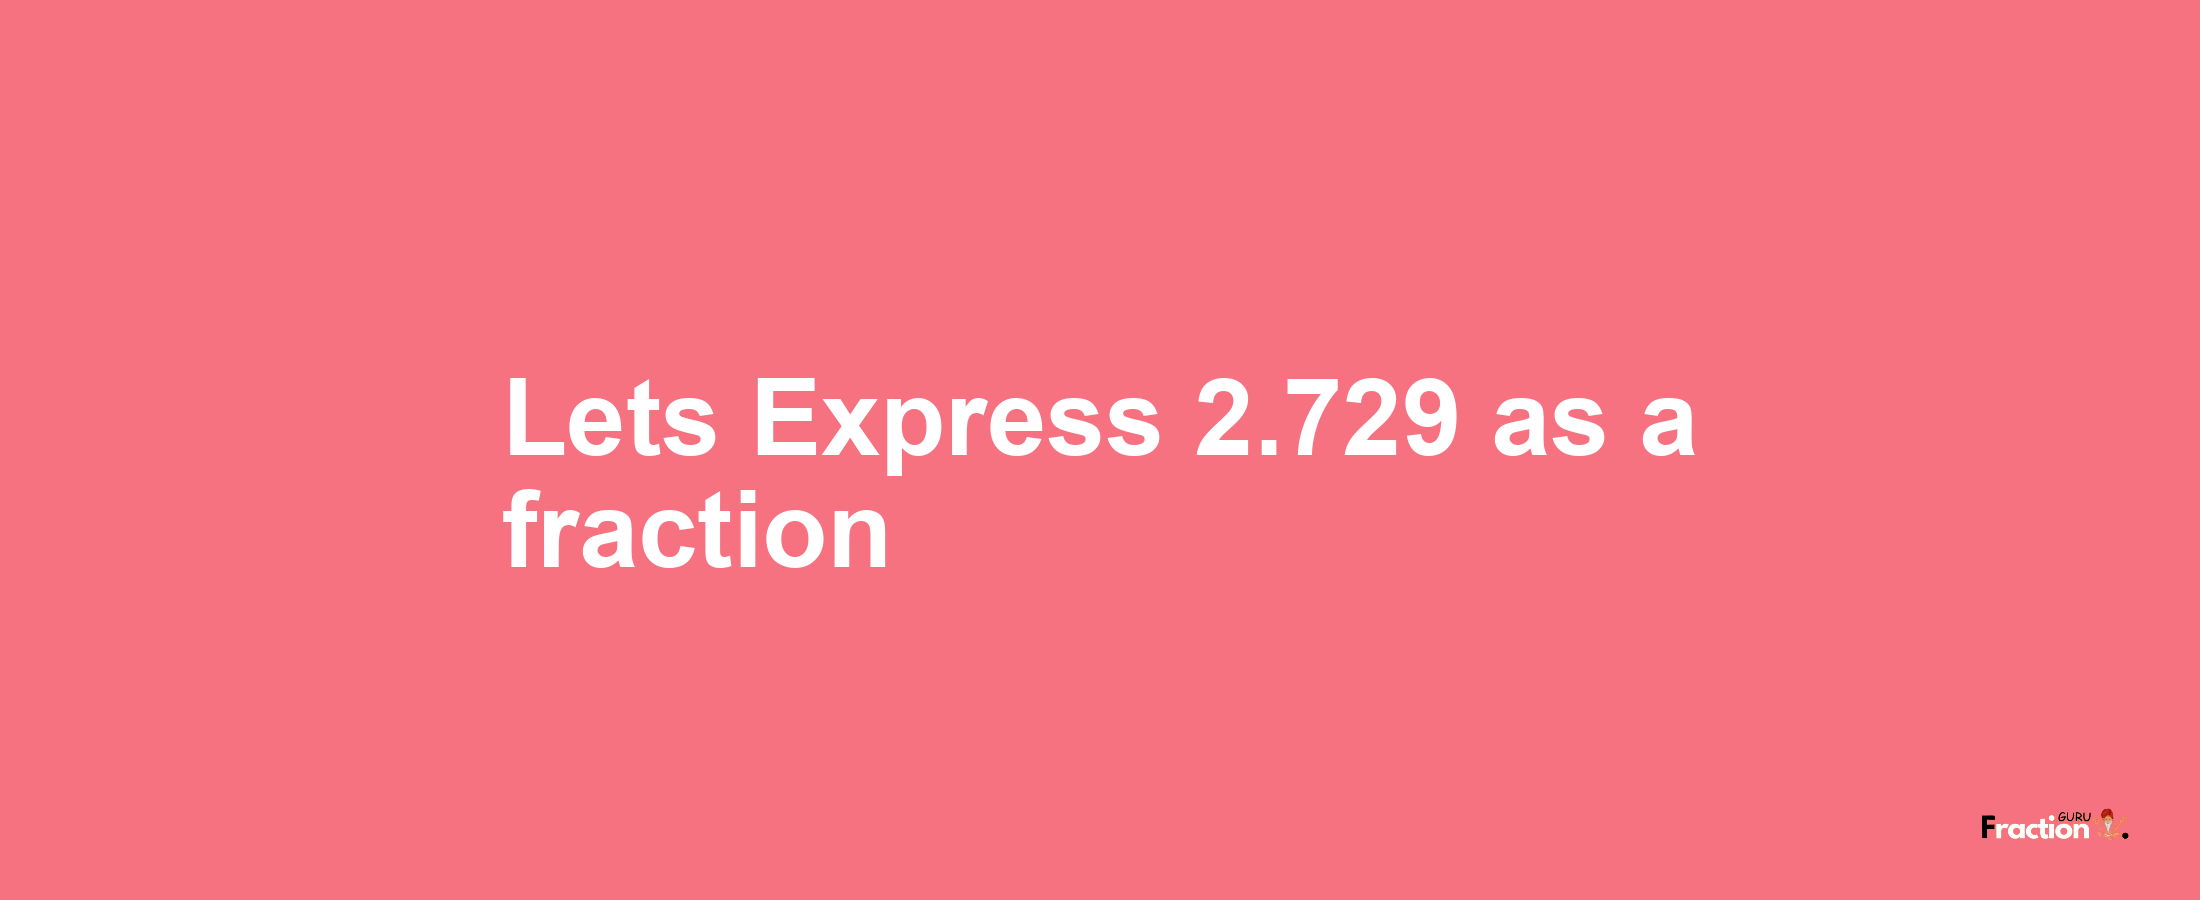 Lets Express 2.729 as afraction